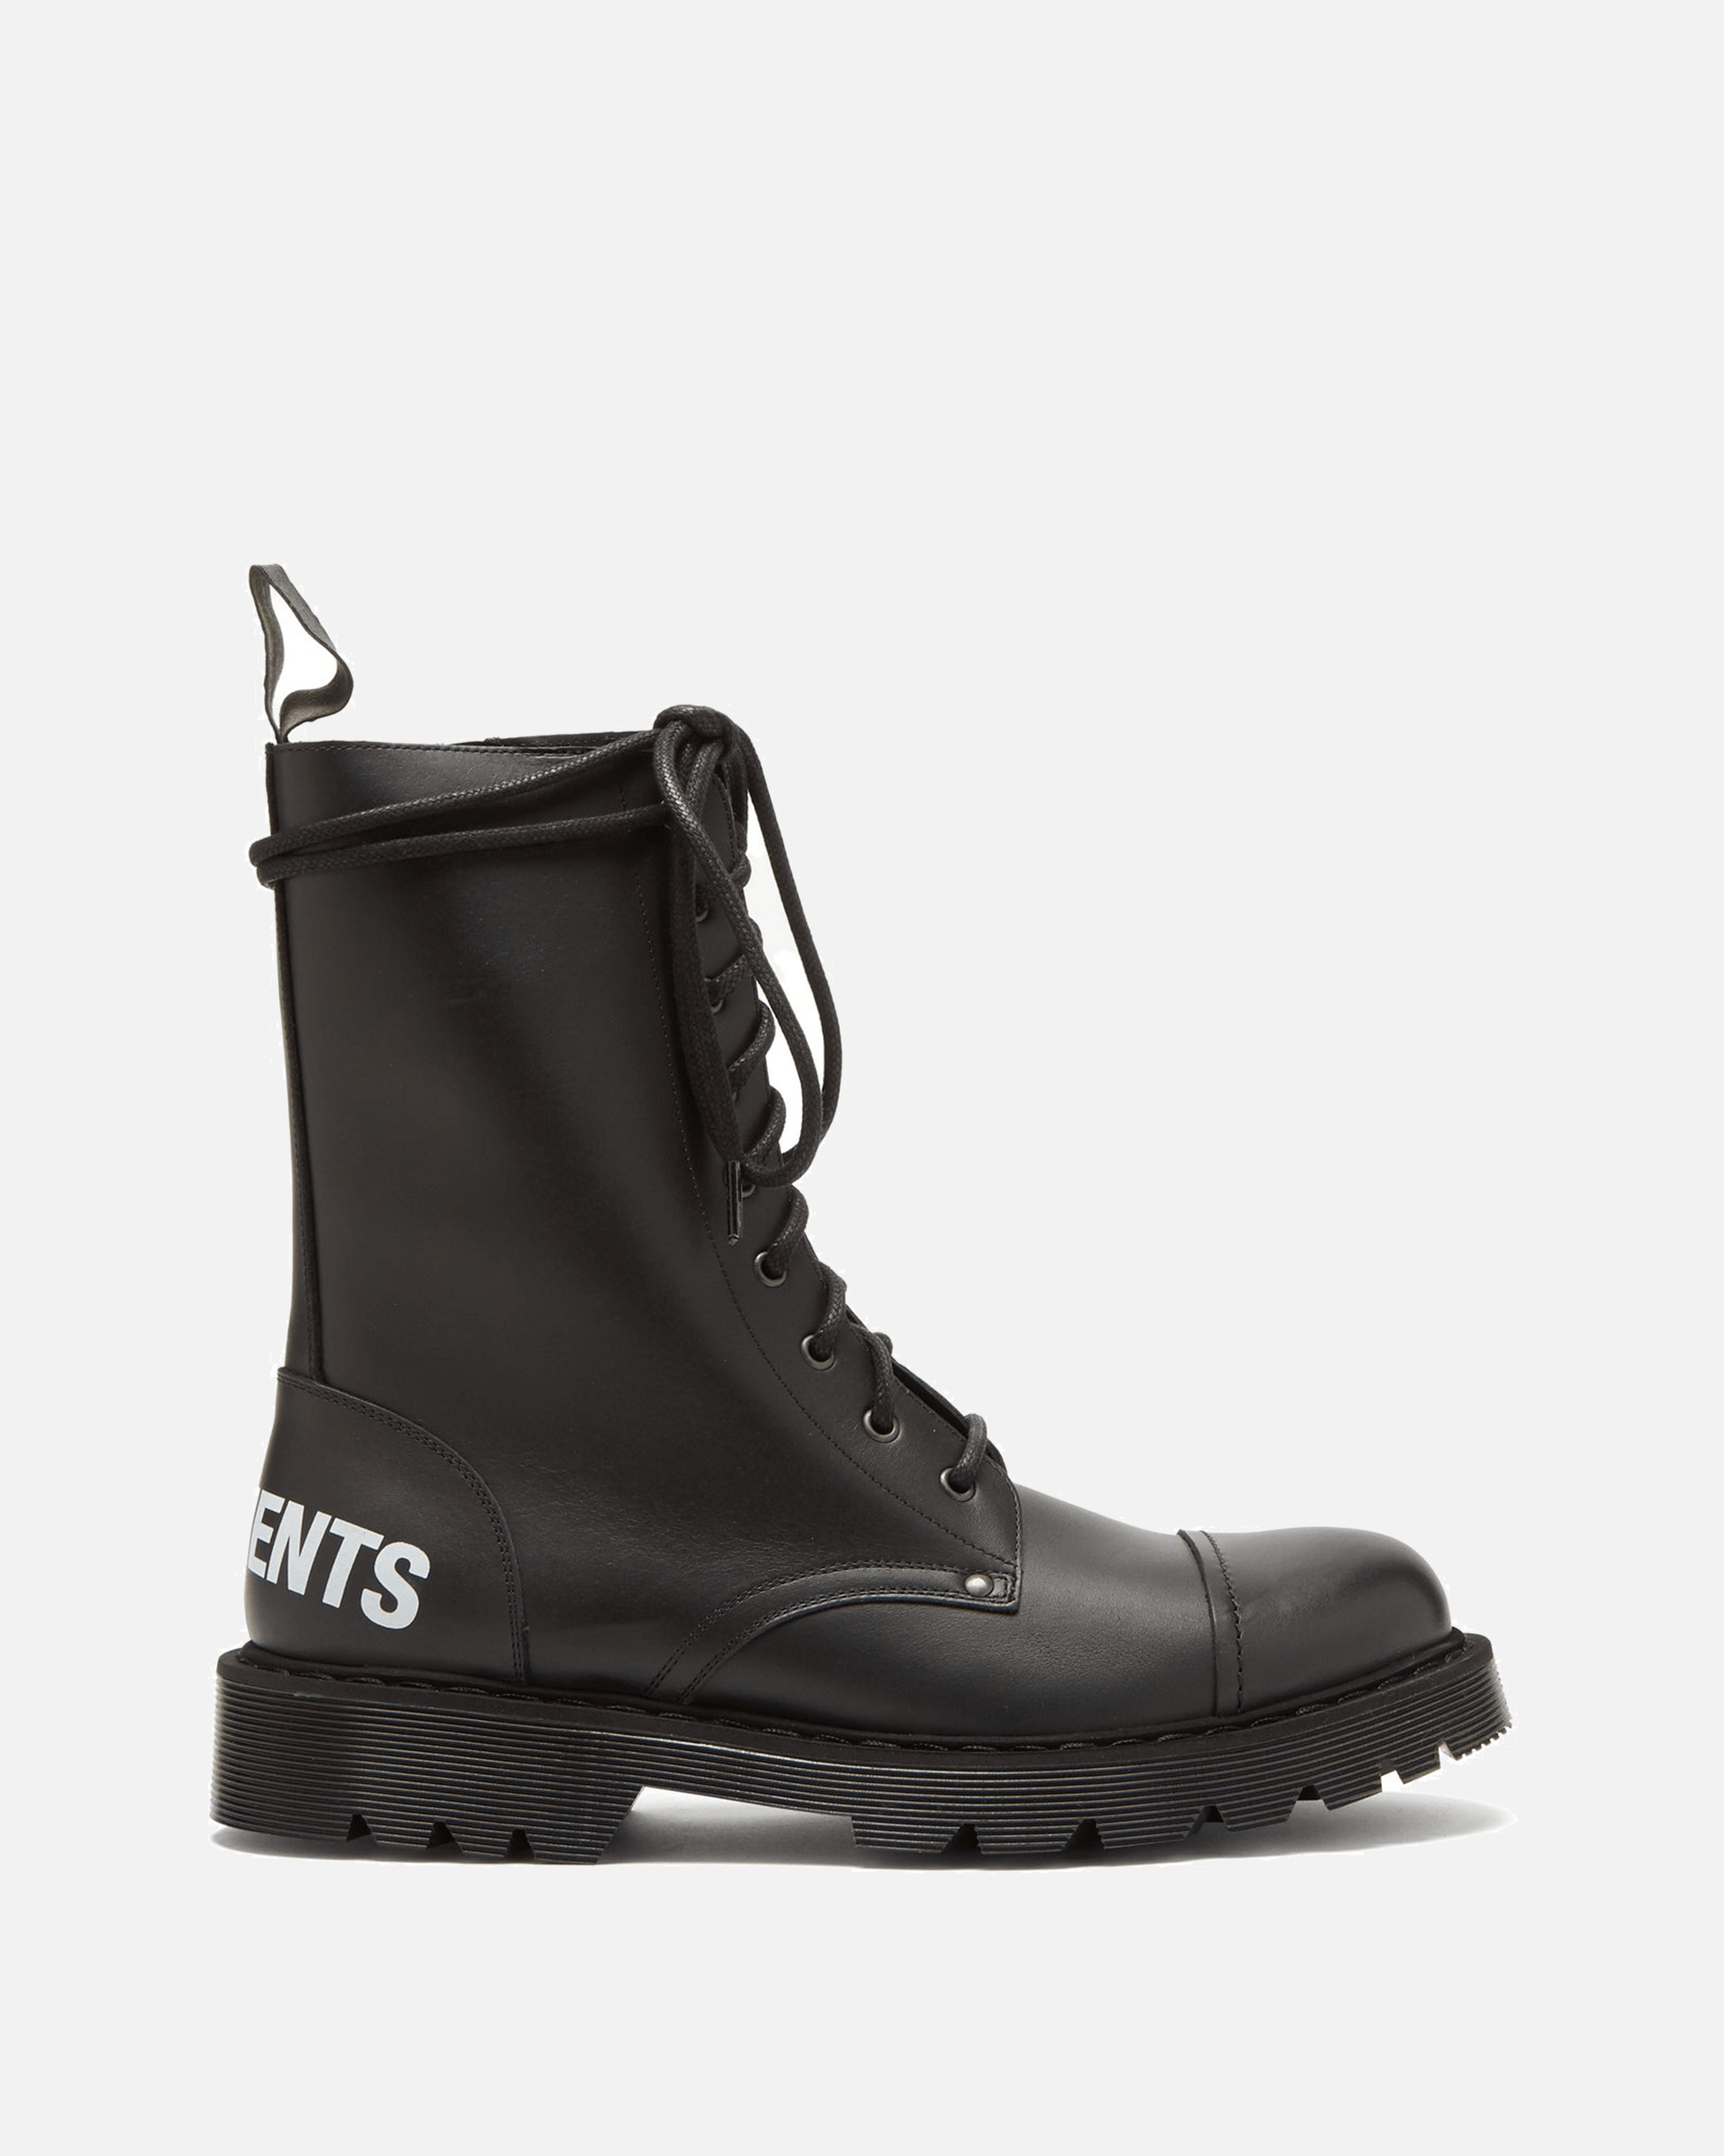 VETEMENTS Men's Boots Logo-Print Leather Boots in Black